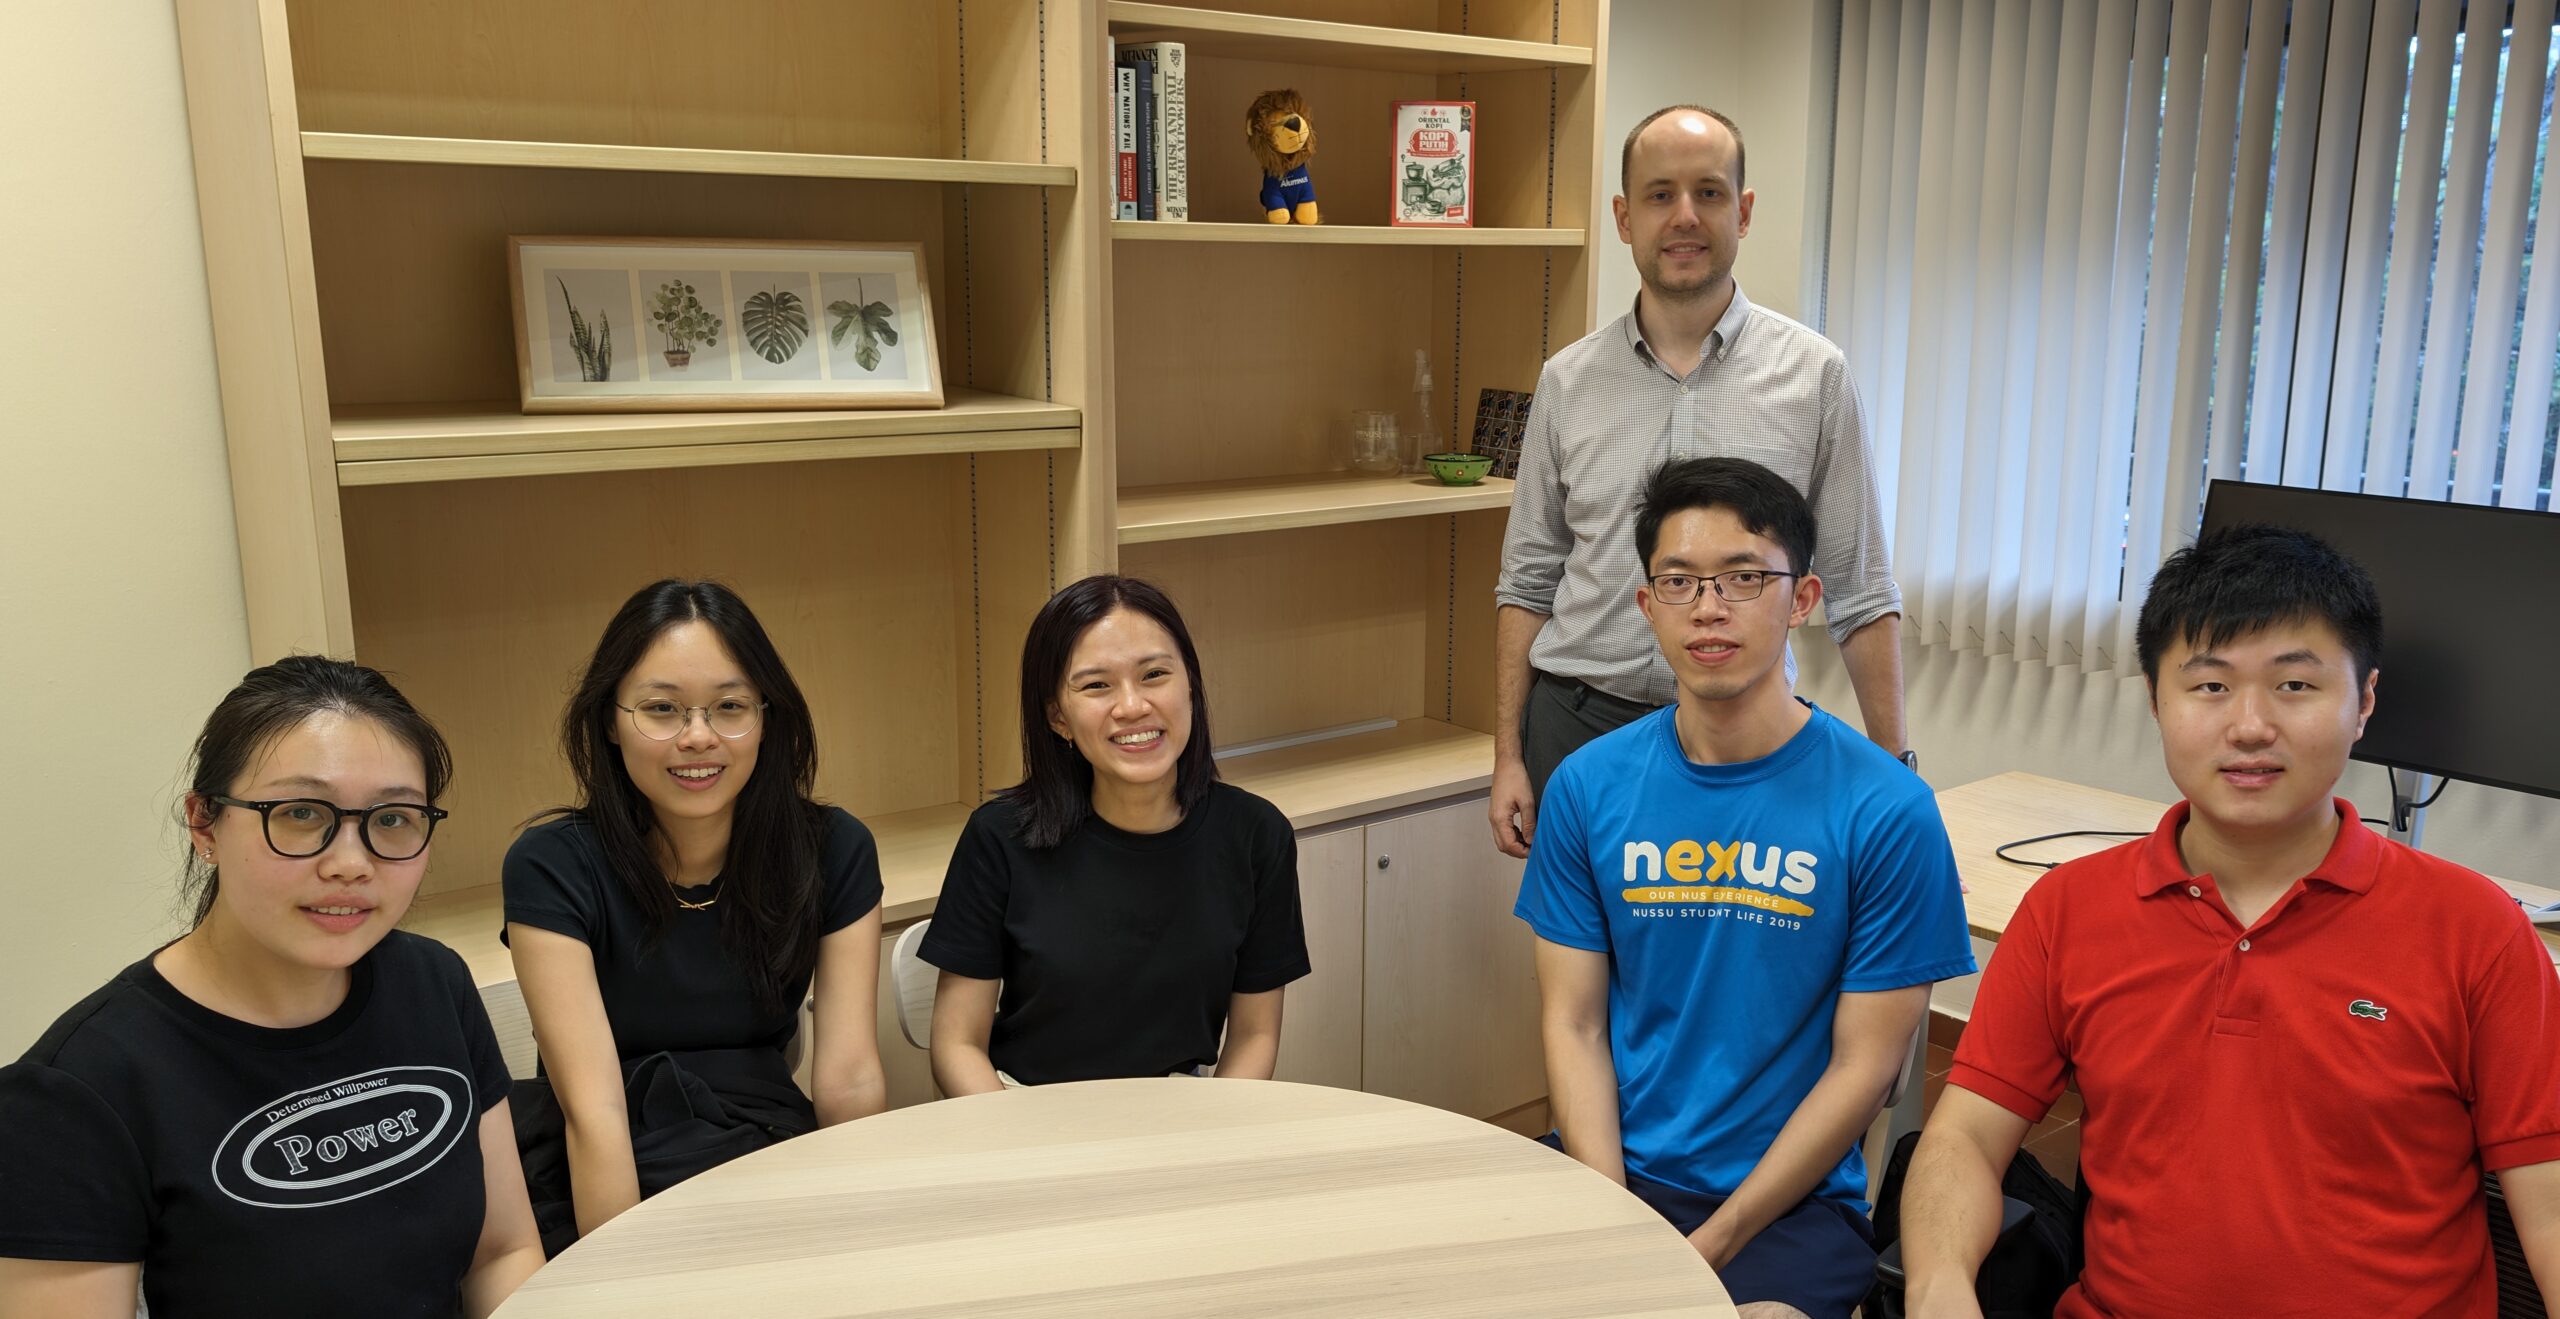 Joris Mueller (standing) with his research assistants (from left to right) Yuqi, Jing Yi, Nicole, Chuyue and Zhiyao